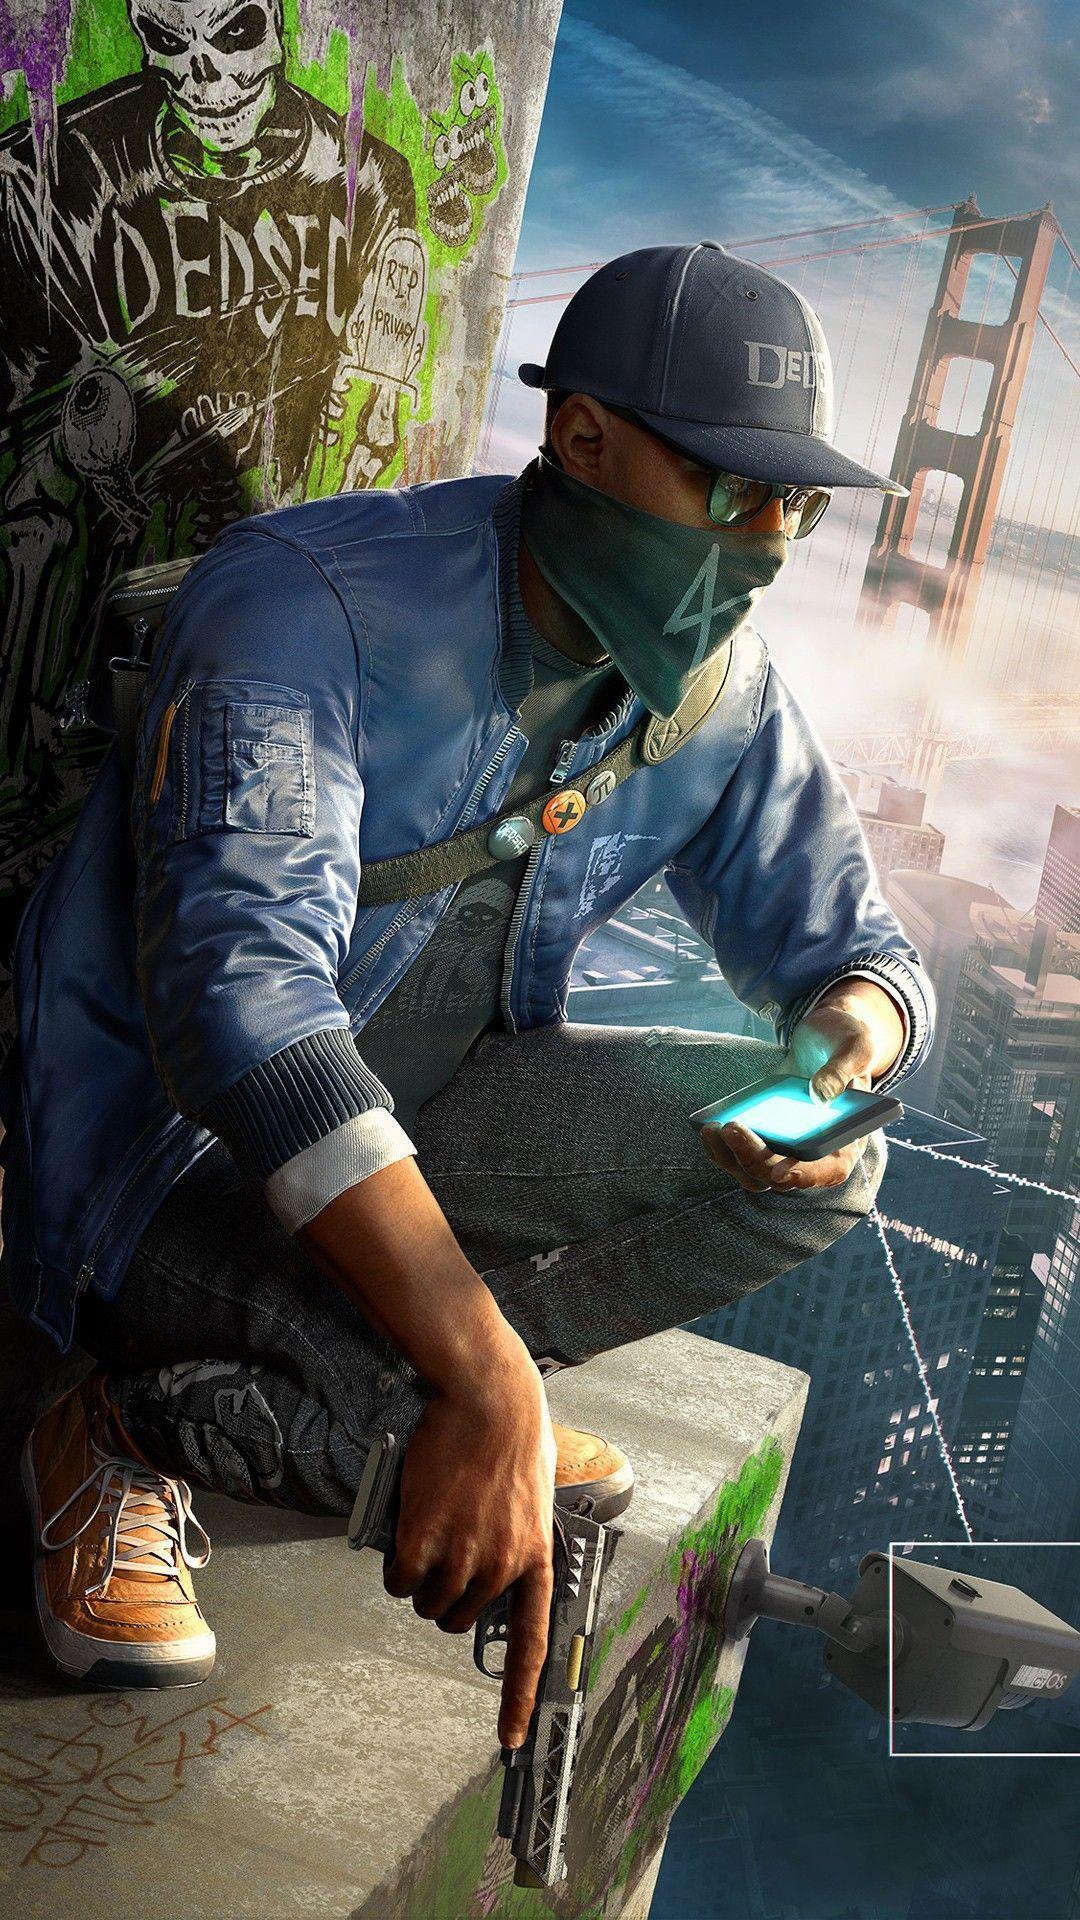 Watch Dogs 2 Game Wallpaper